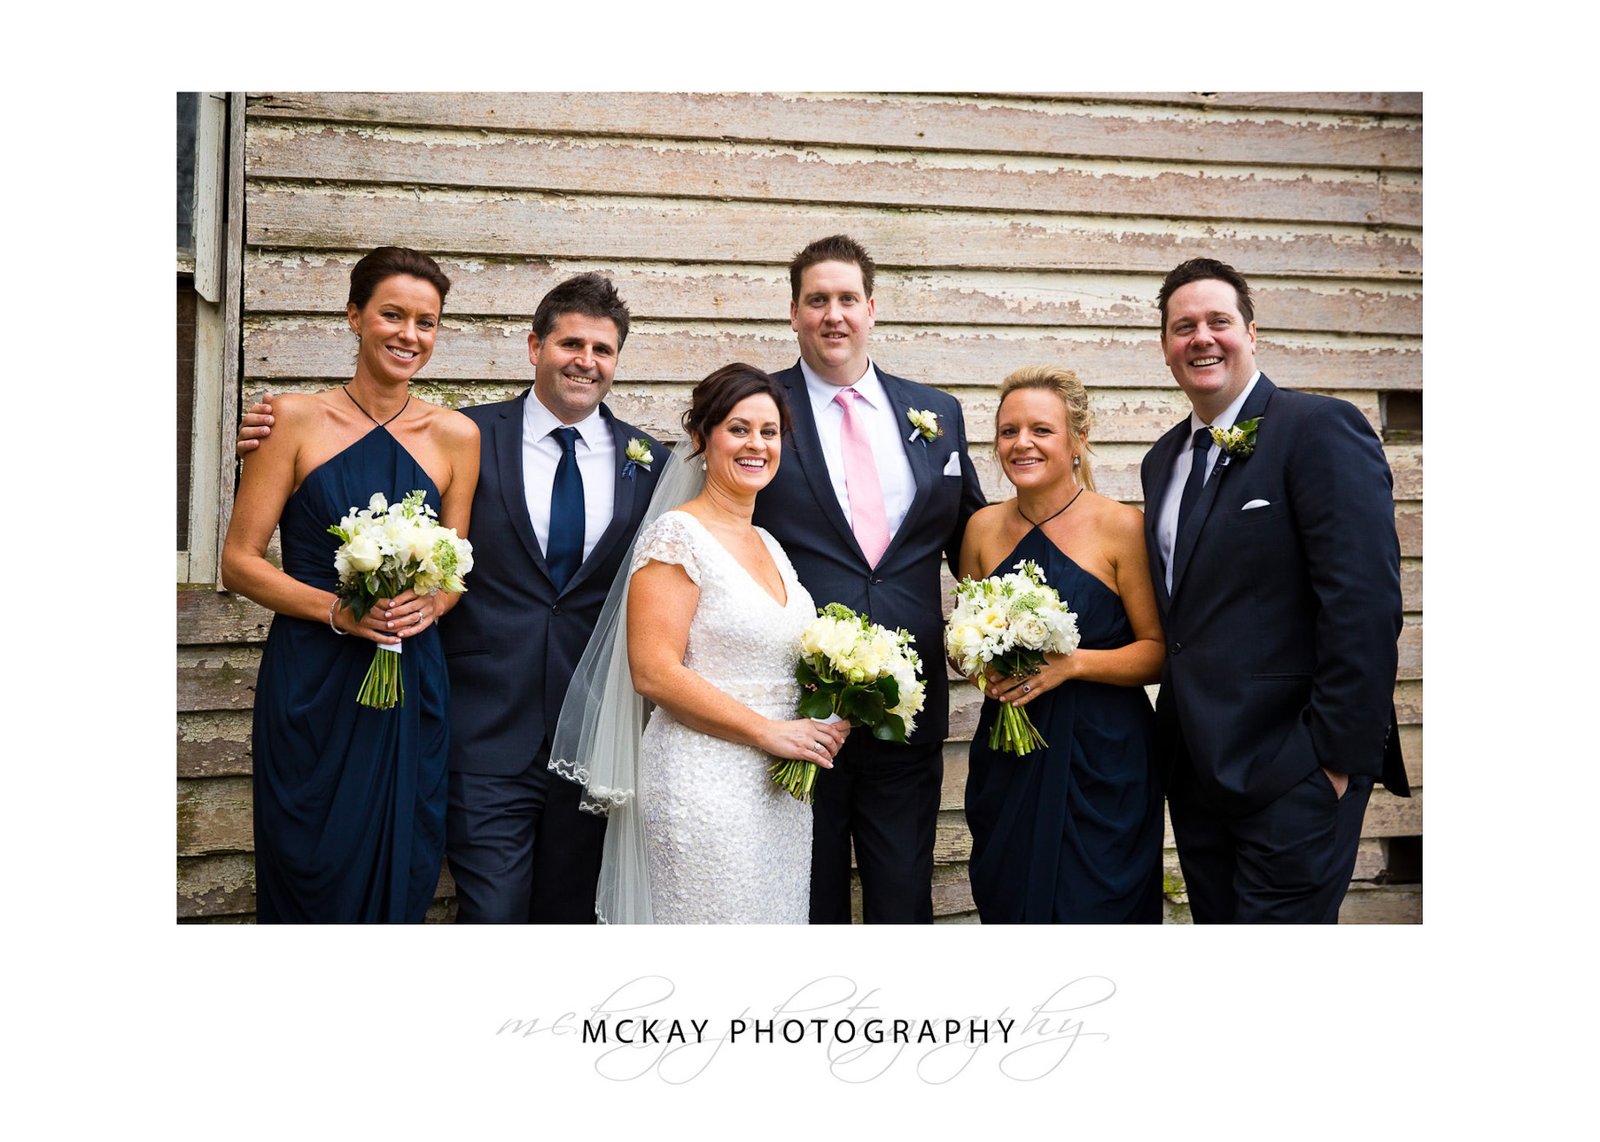 Bridal party photo against old weatherboard barn Bowral